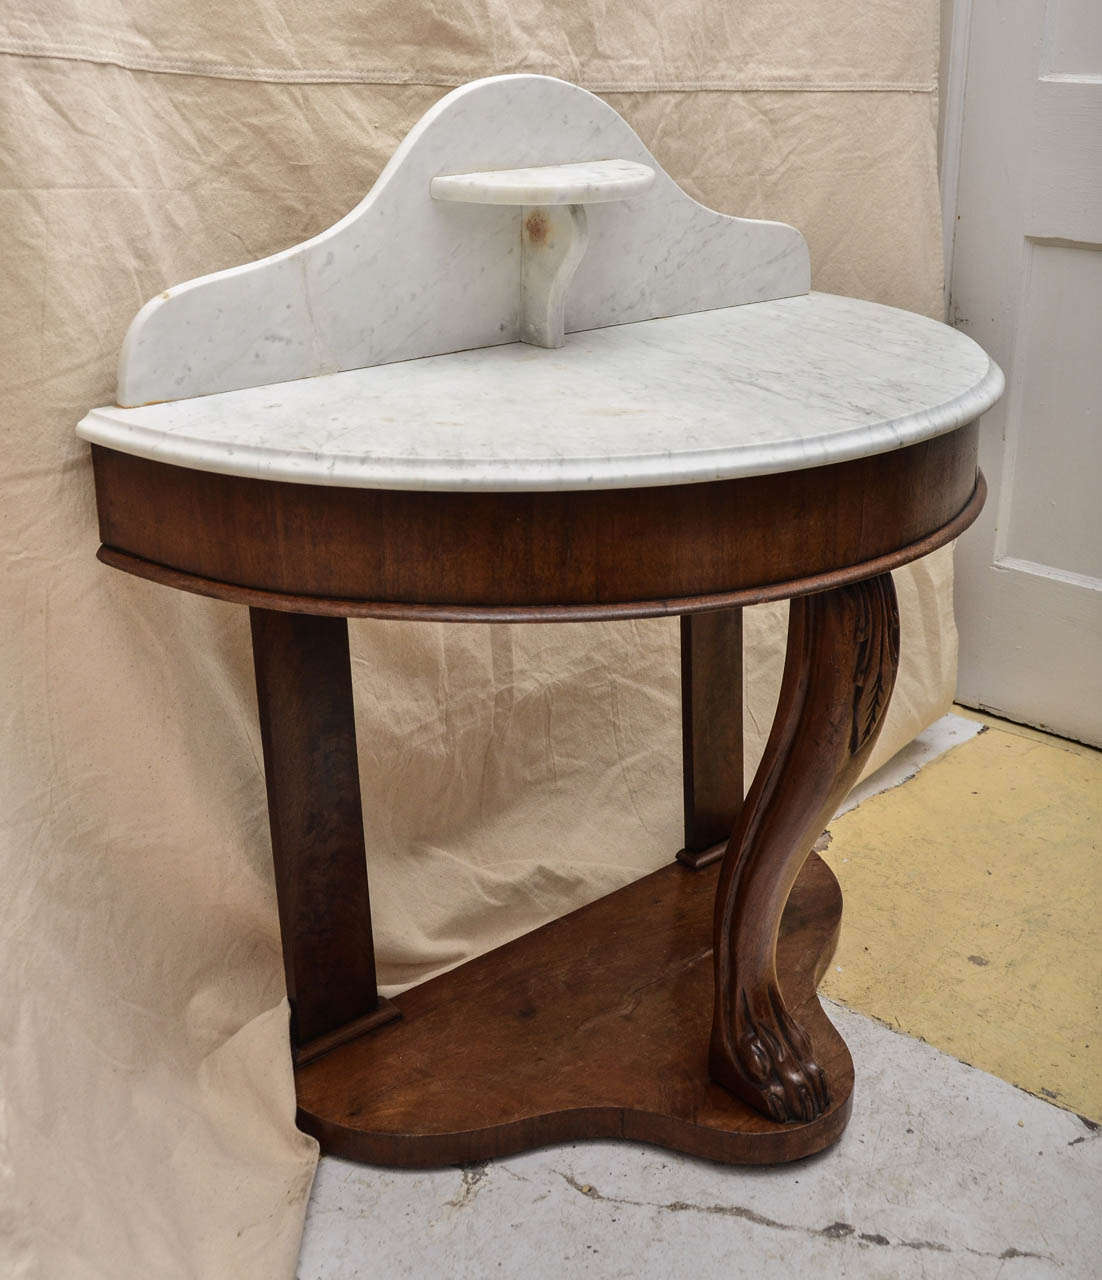 English Wm. 1VTh Demi Lune Marble Top Washstand Has A Arch Shaped Back With Half Round Shelf In The Center Of the Back. The Base Is Shaped To Echo The Backslash Shape. The Back Two Legs Are Flat With Three Quarter Round Molding Surrounds. The Front